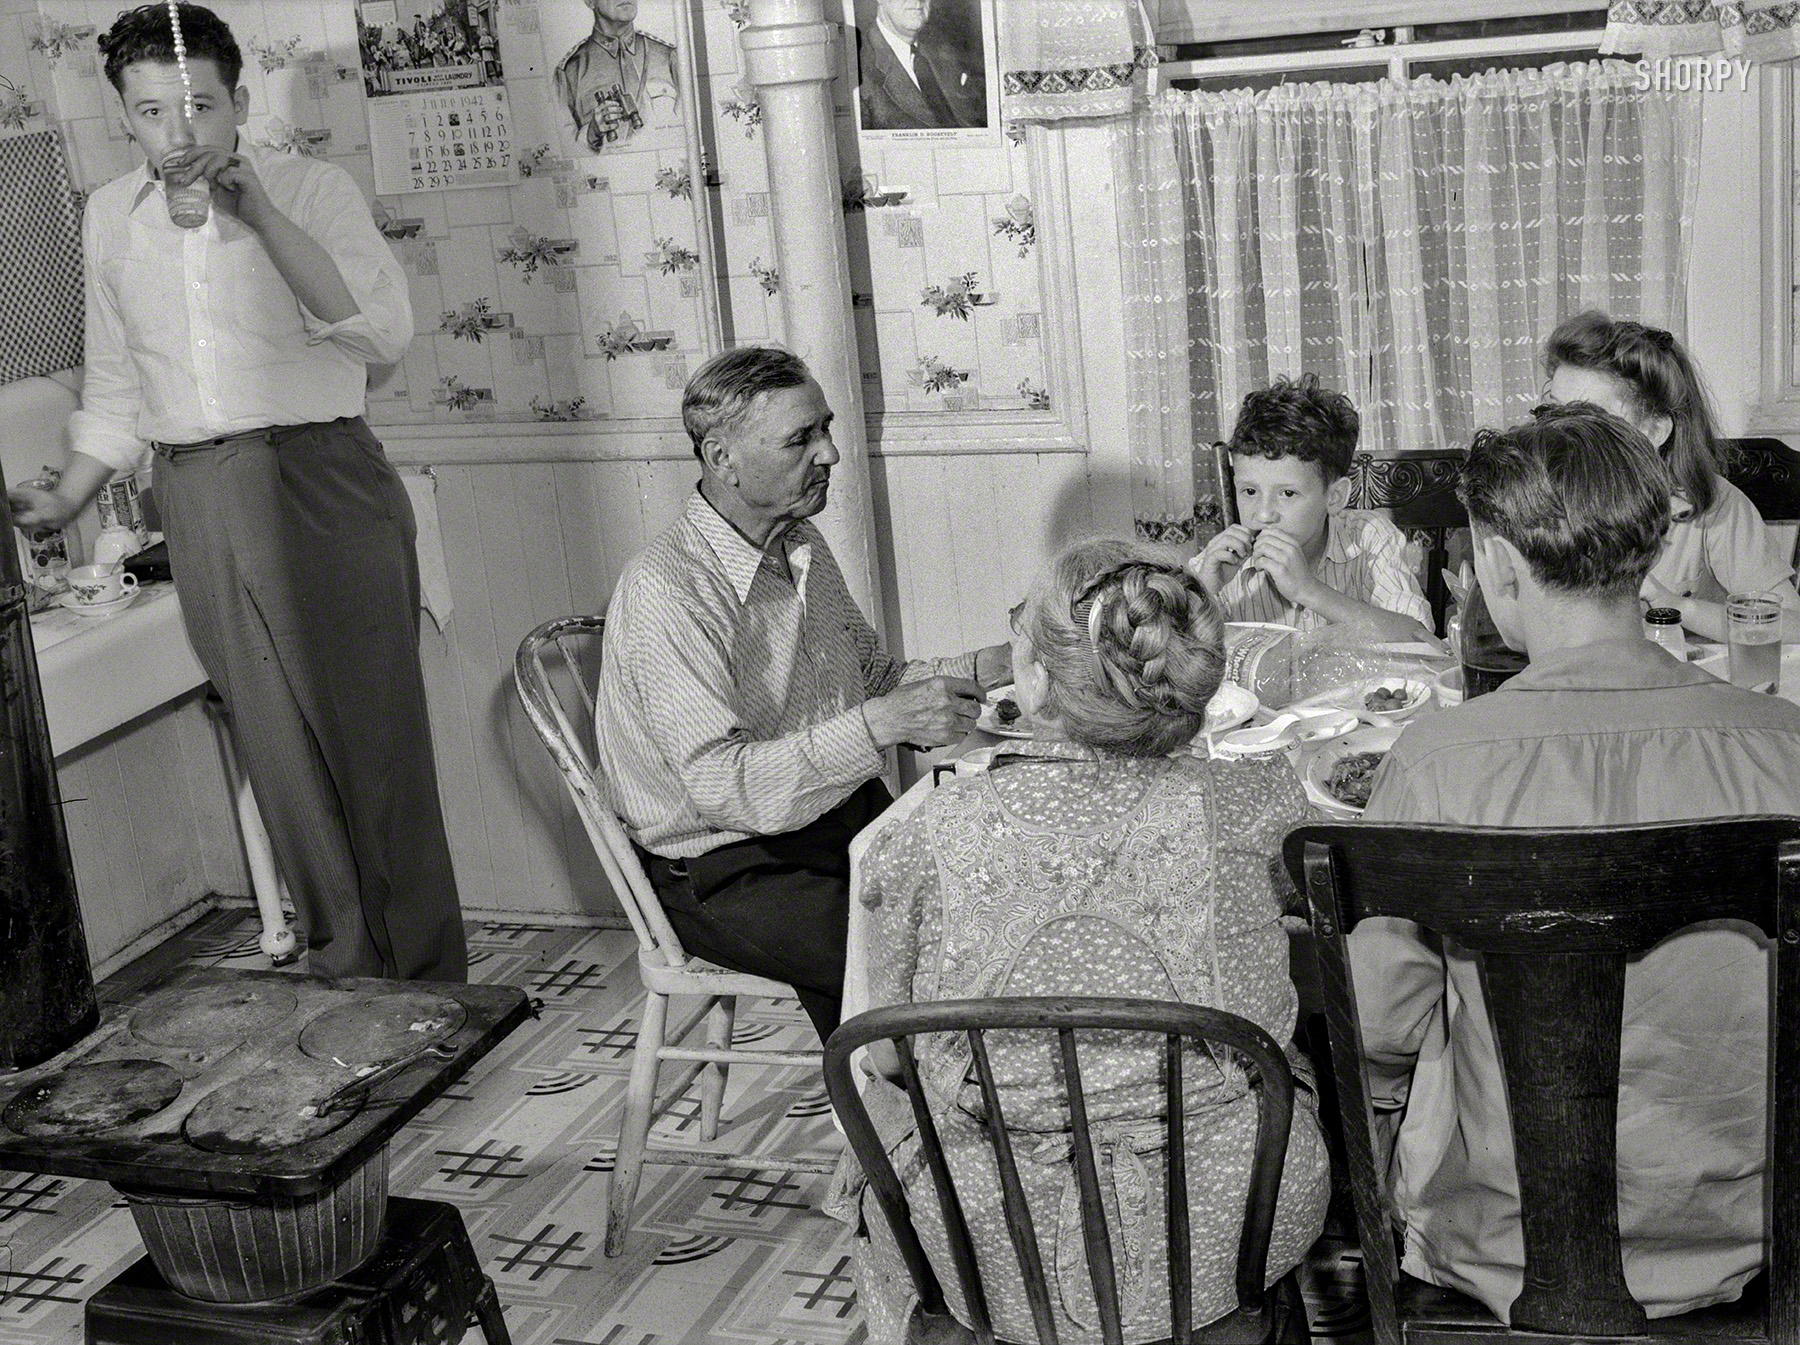 June 1942. Meanwhile, back in Chicago, we return to the Kassalo family kitchen for a another helping of "American as the Smiths and Joneses." Photo by Ann Rosener for the Office of War Information. View full size.